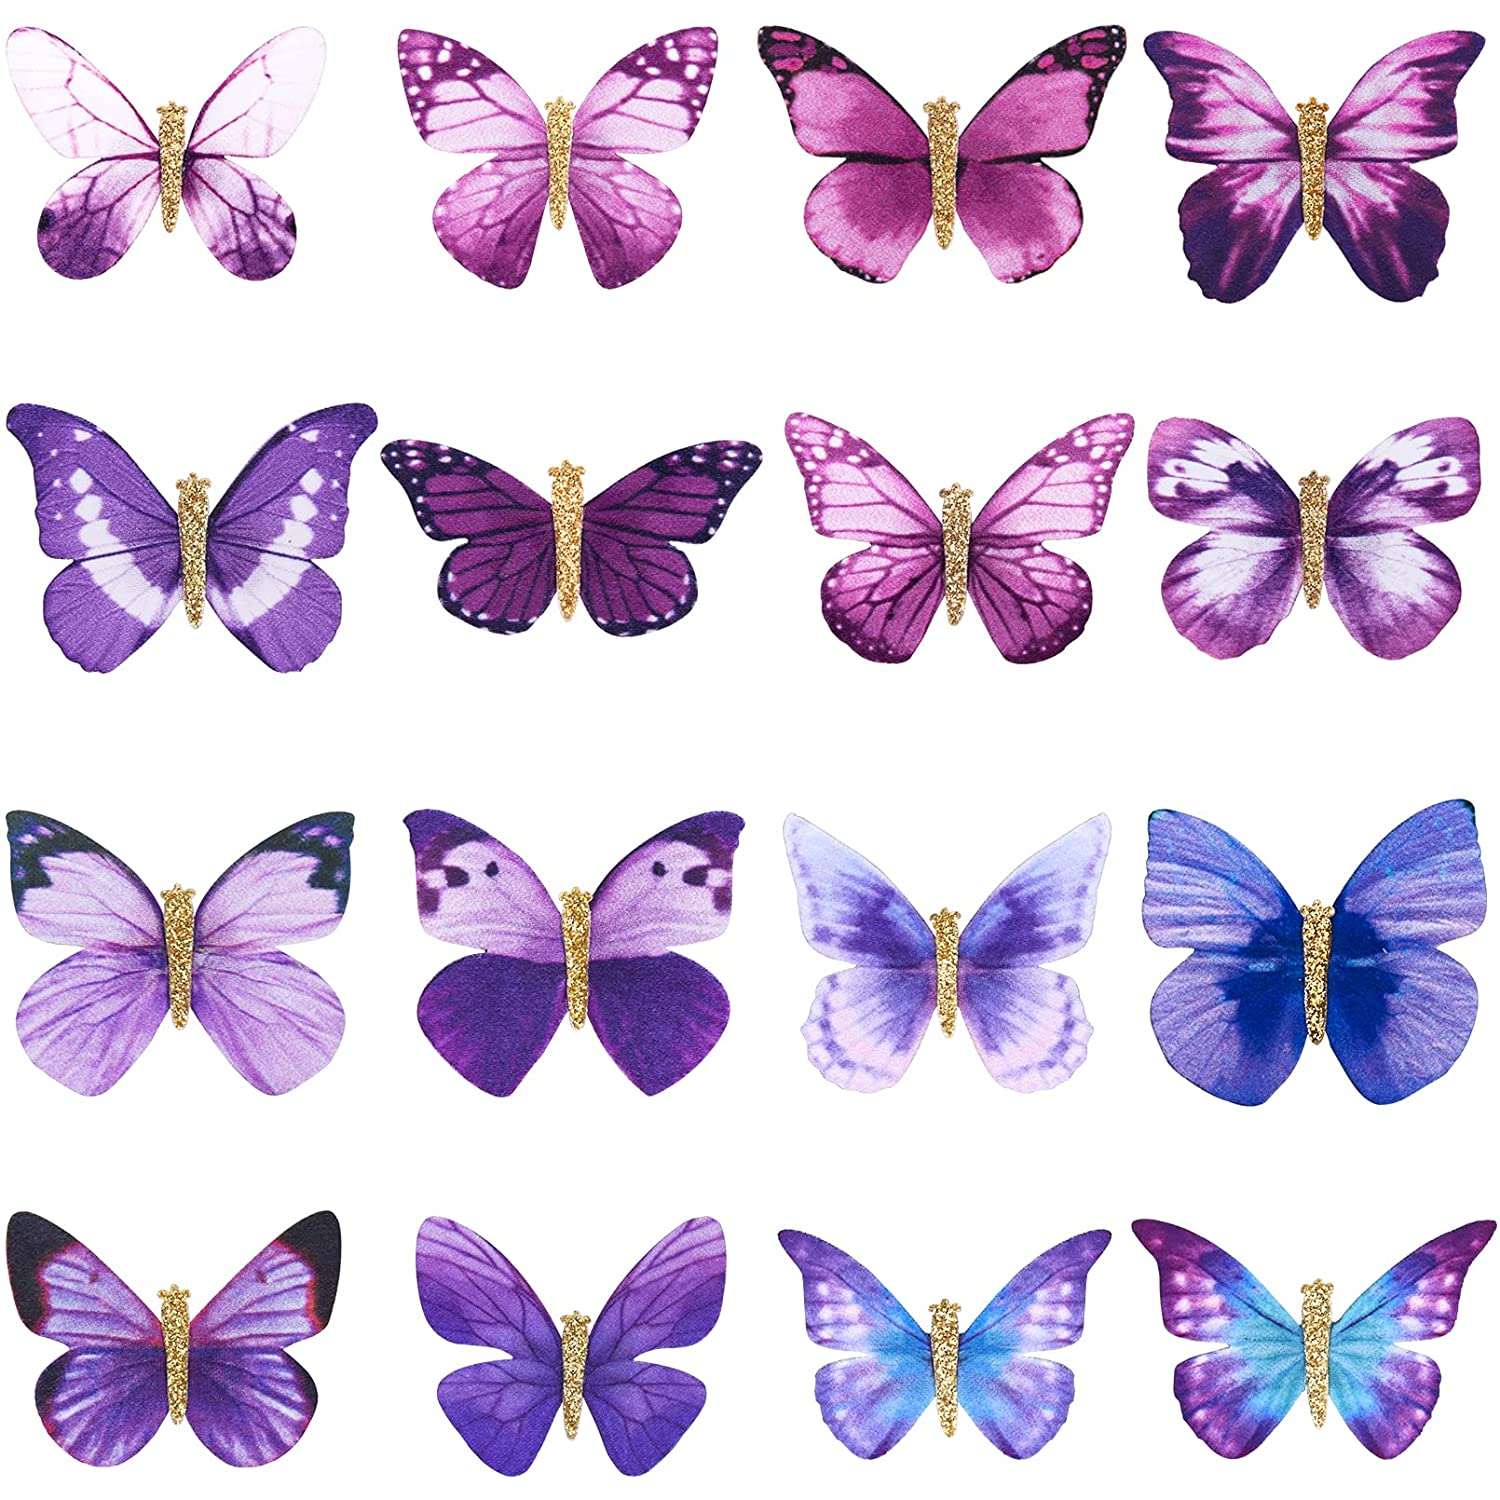 DEEKA 16 PCS Butterfly Hair Clips Small Realistic Colorful Handmade 90s Hair Clips Barrette Hair Accessories for Women and Girls -Purple